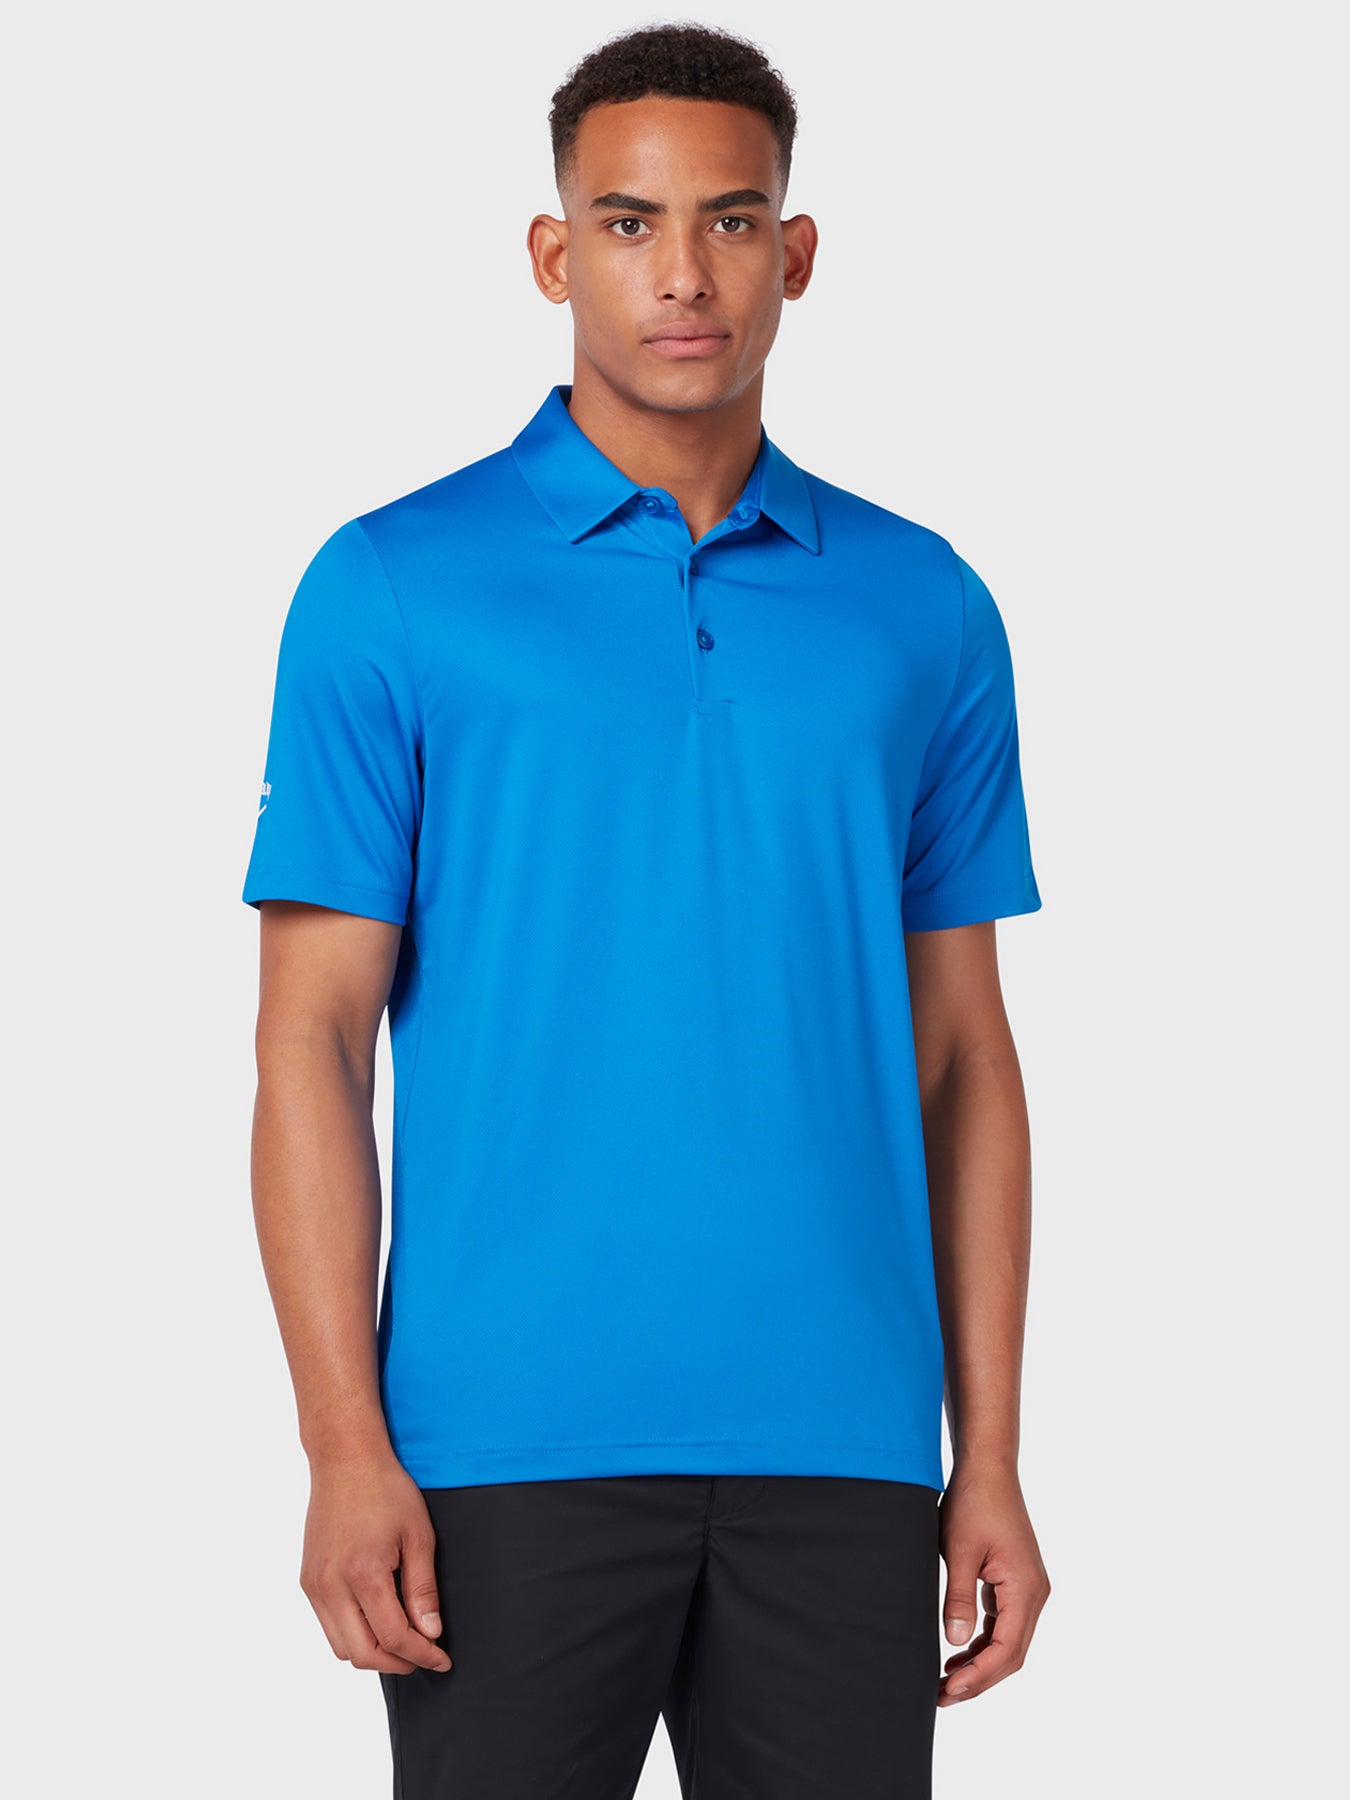 View Swing Tech Tour Polo In Magnetic Blue Magnetic Blue S information